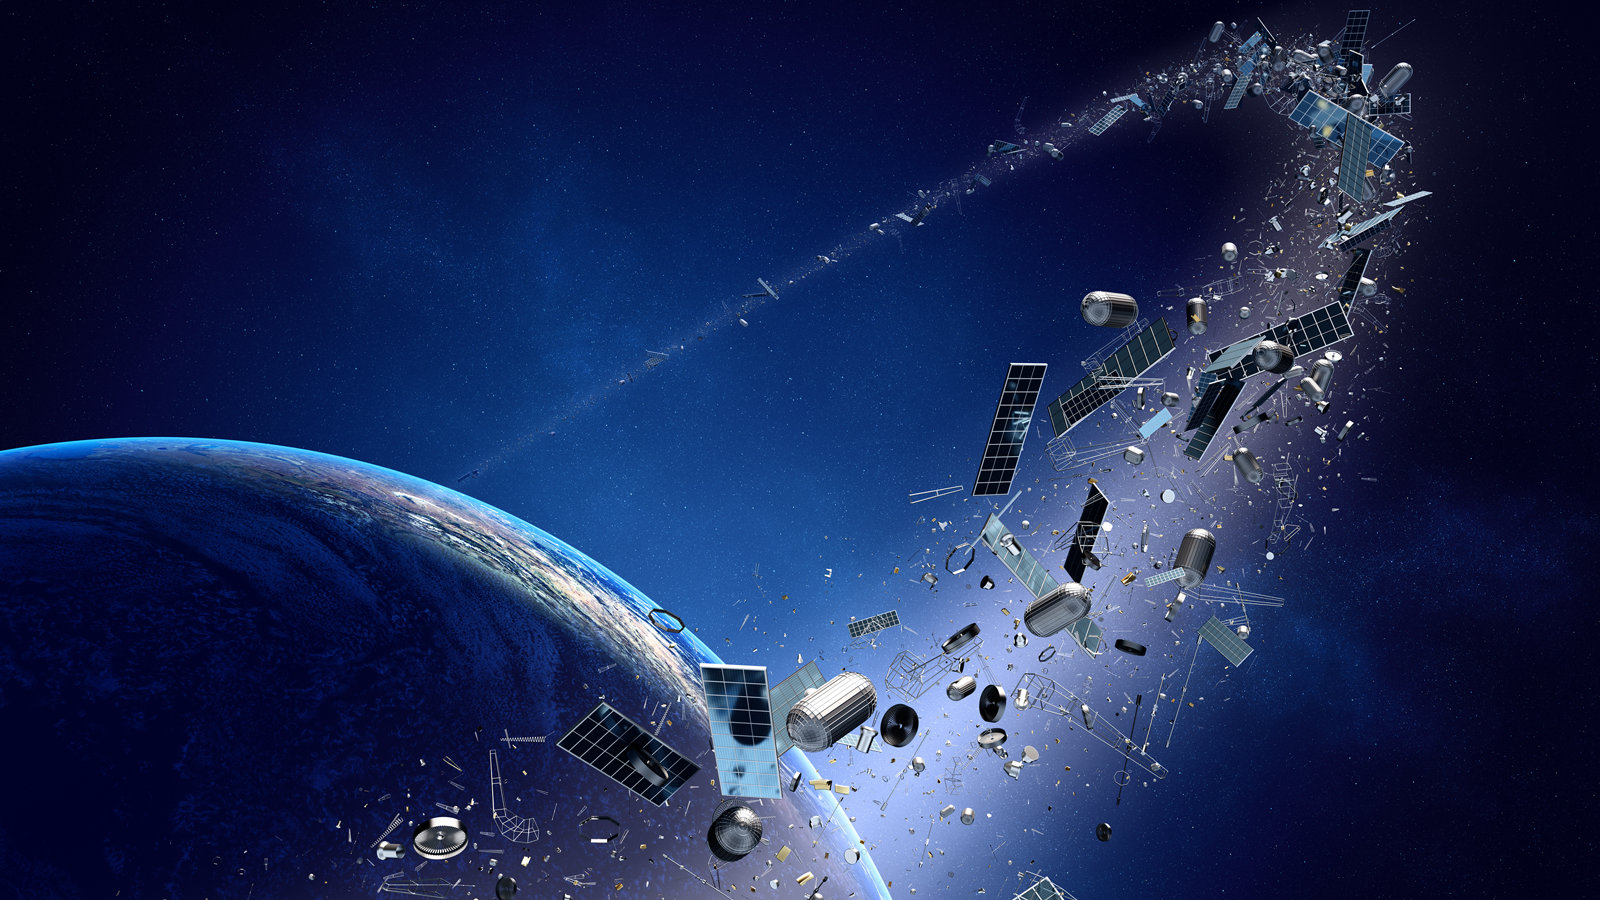 Over 40 companies show commitment to stop space junk by signing ESA’s Zero Debris Charter